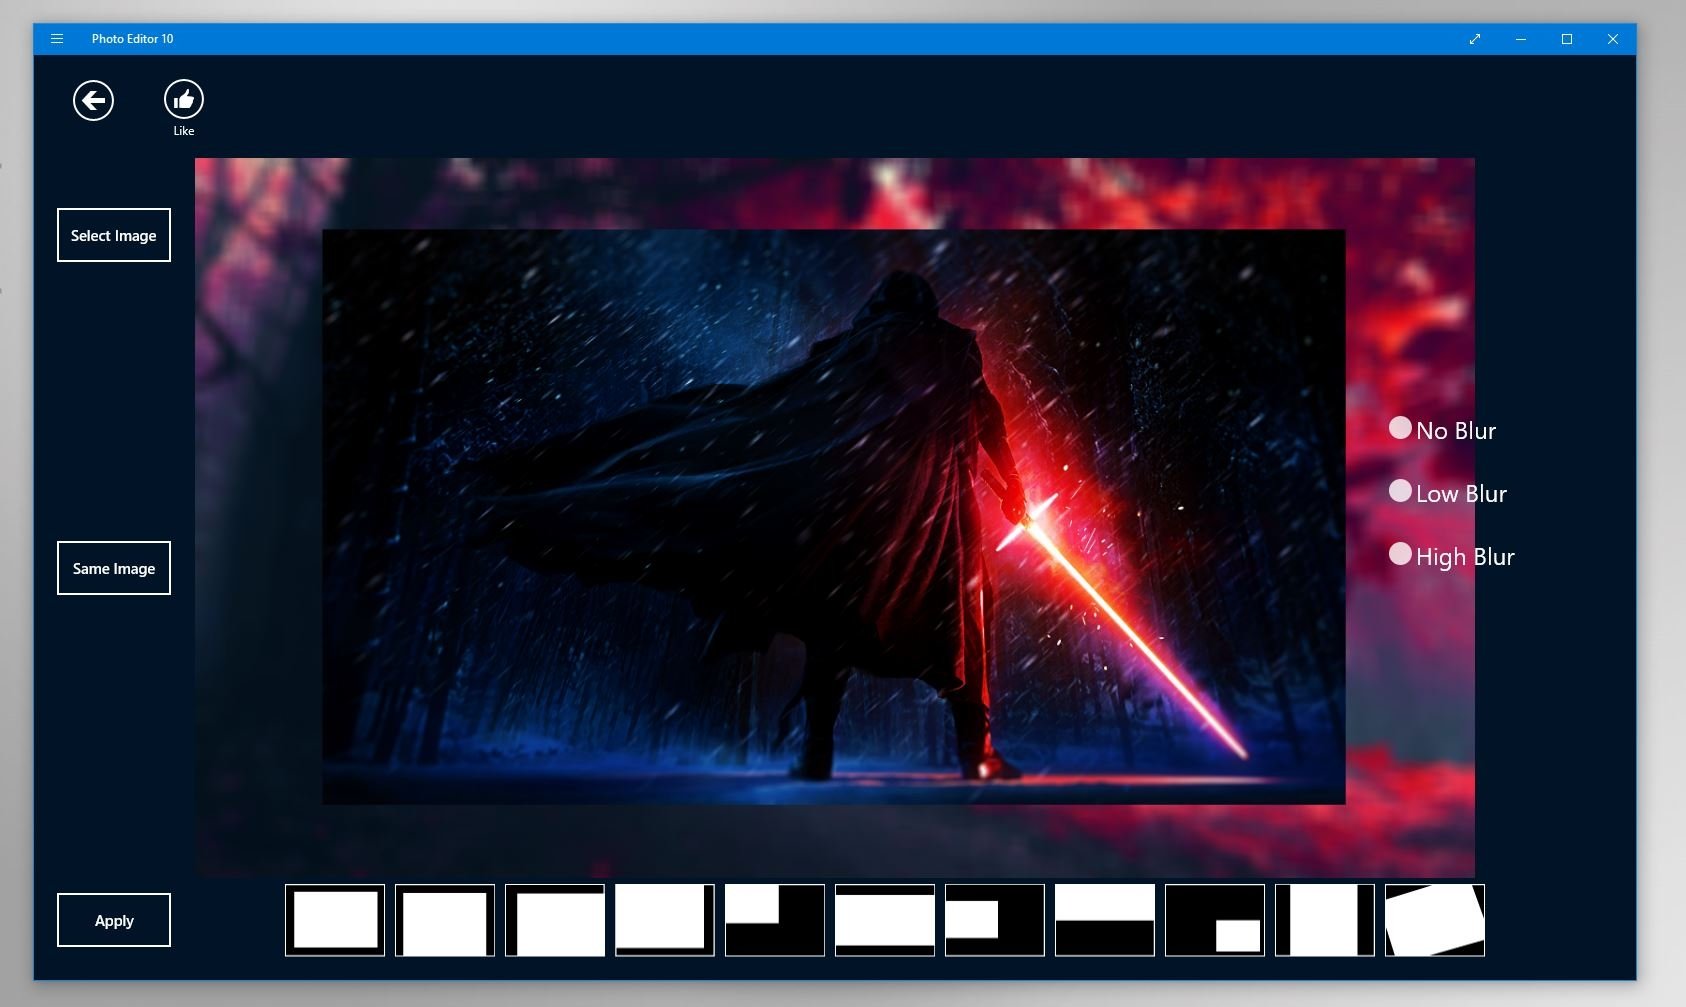 zoom for windows 10 download